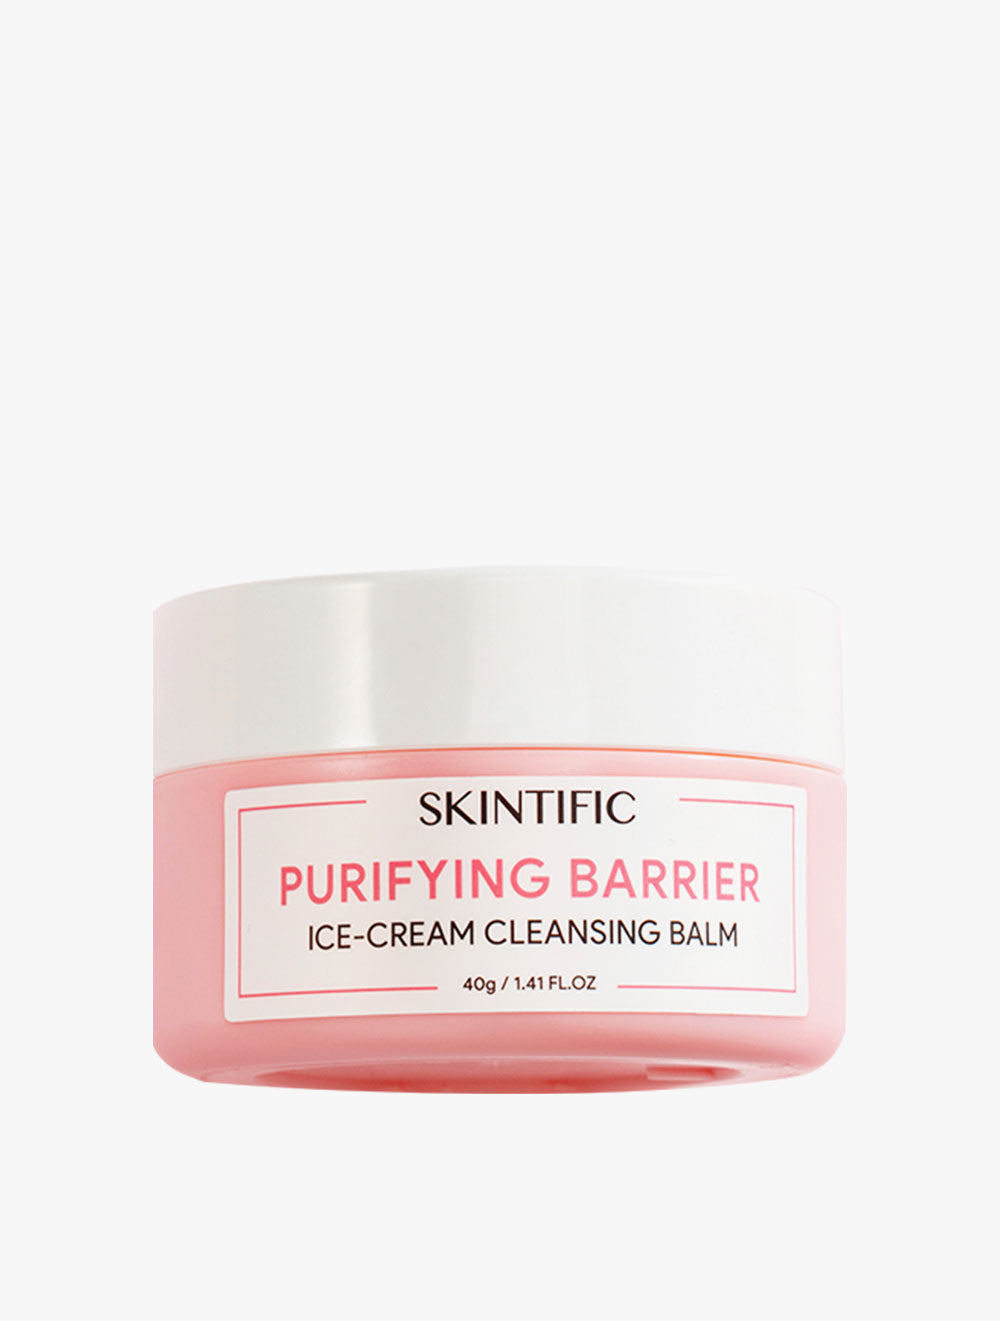 SKINTIFIC Purifying Barrier Ice Cream Cleansing Balm-40g